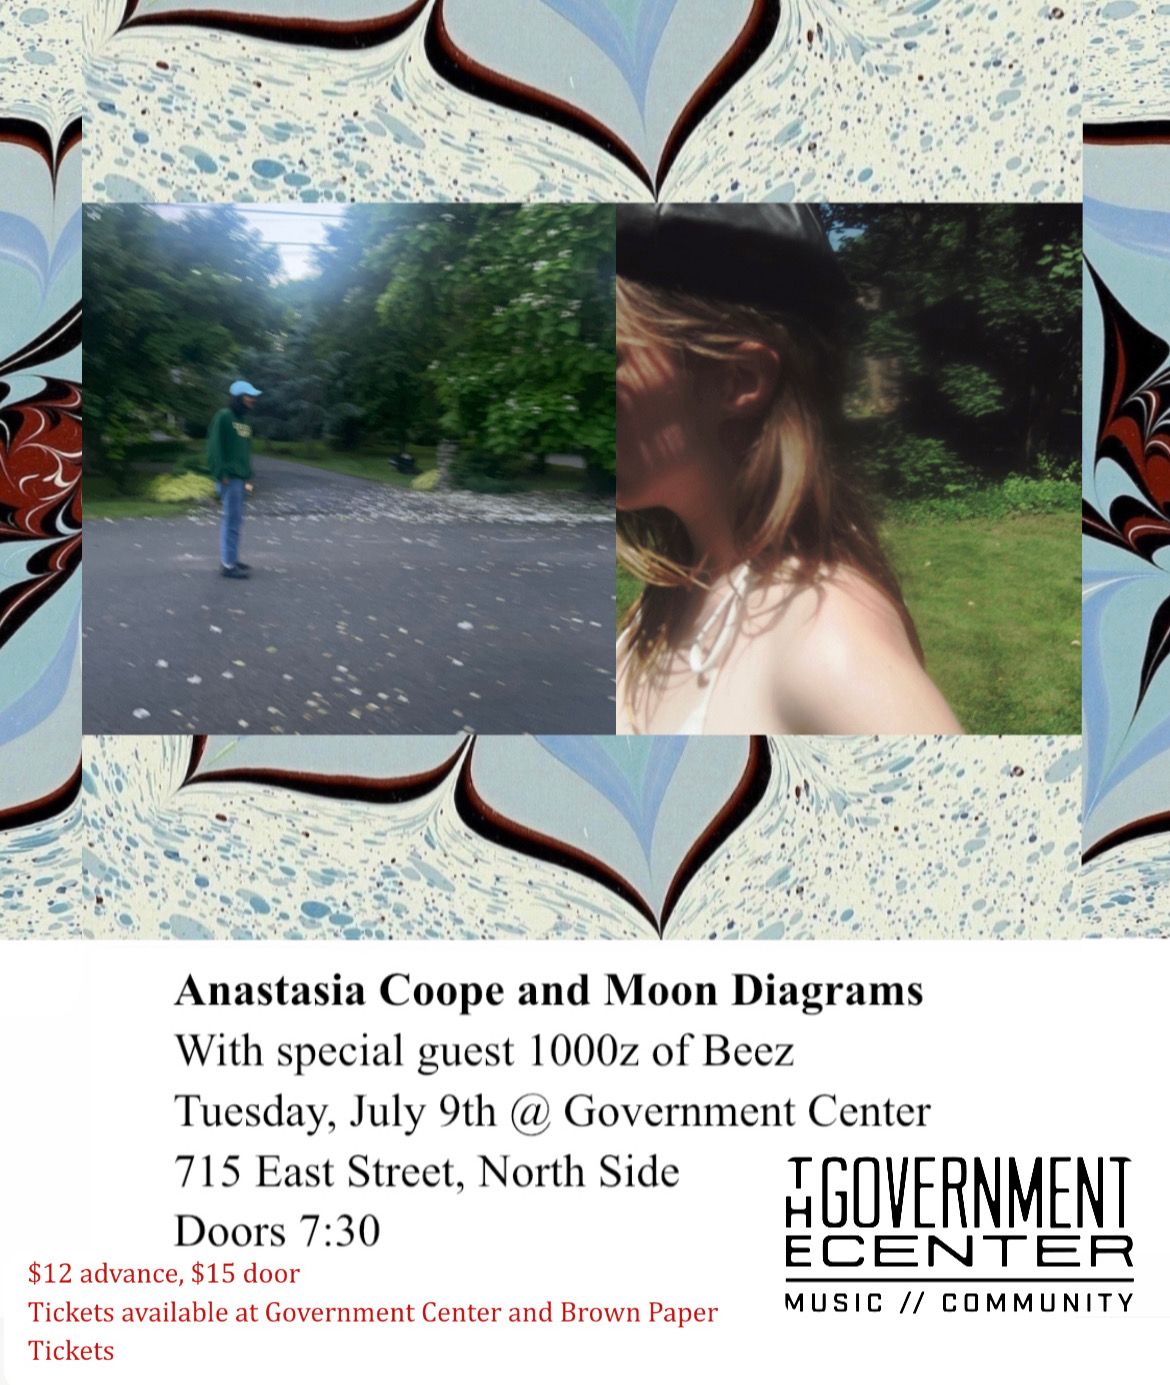 Anastasia Coope (NYC), Moon Diagrams (Moses A. of Deerhunter), 1000z of Beez at Govt Ctr